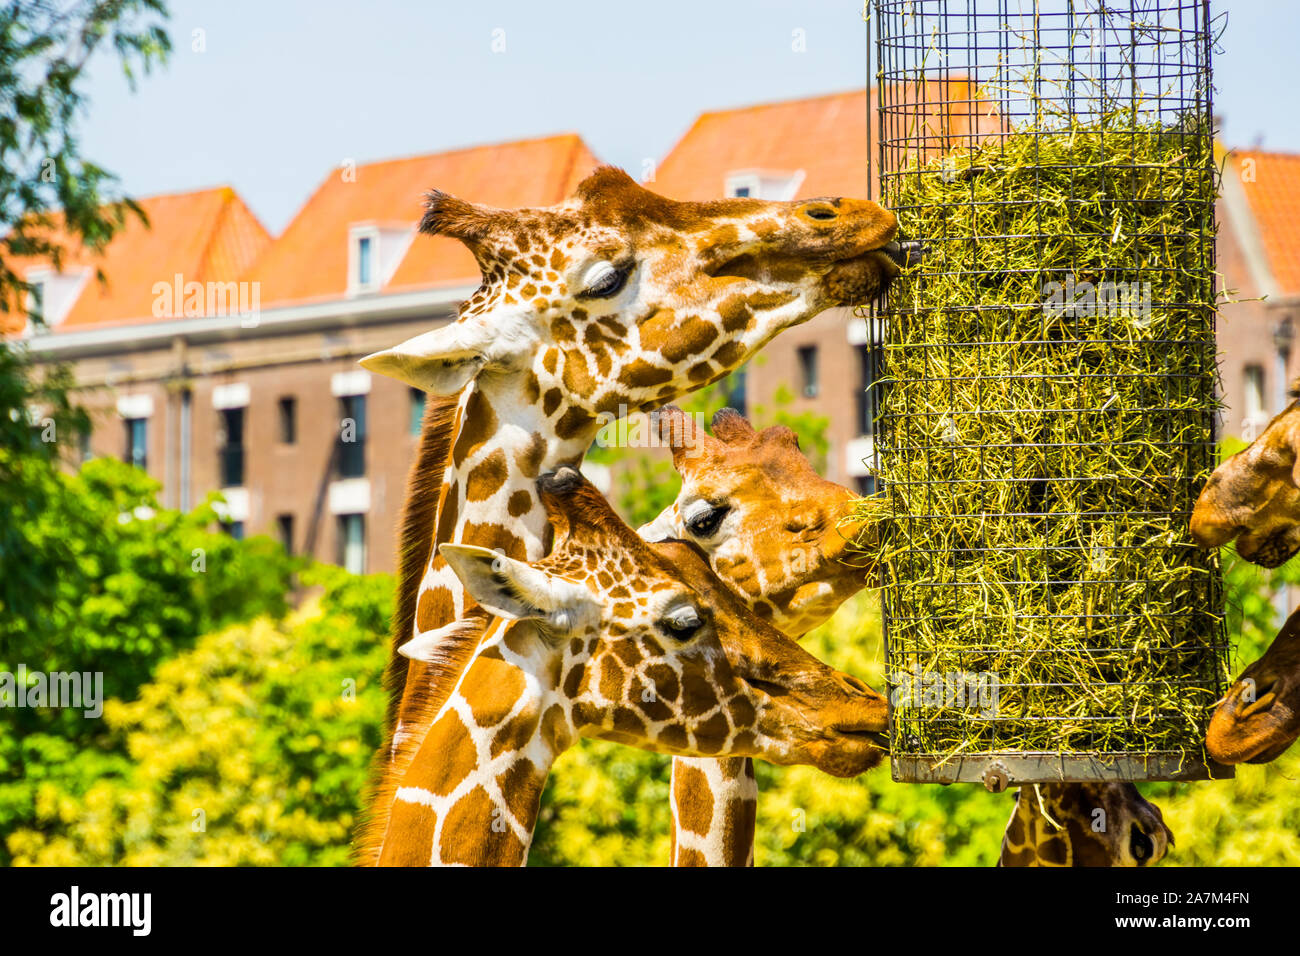 Somali giraffes eating hay from a basket, zoo animal feeding equipment, Endangered animal specie from Africa Stock Photo